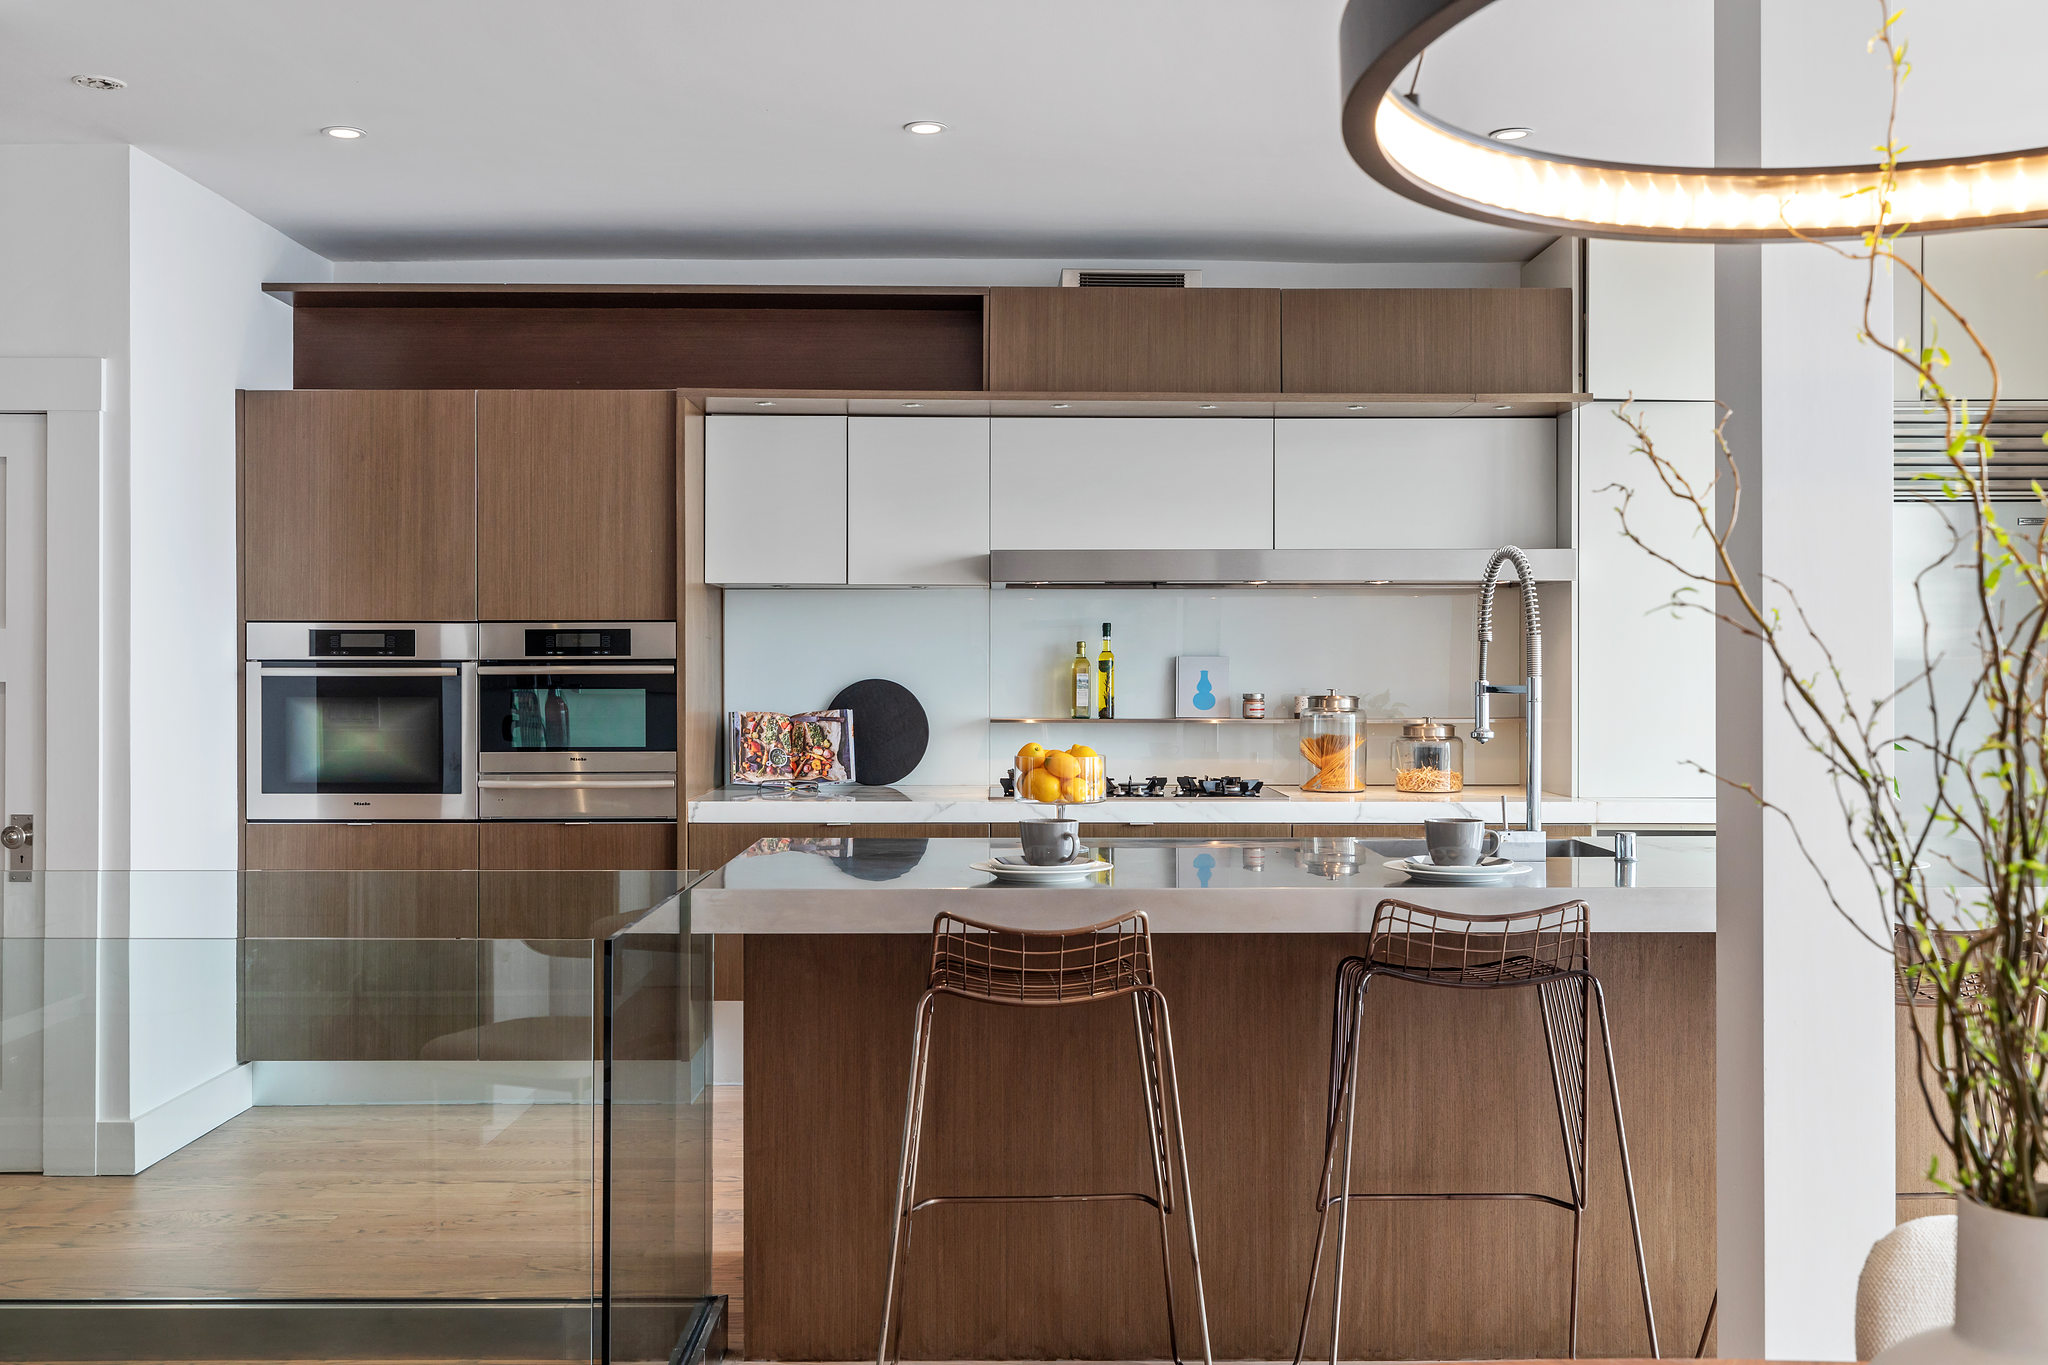 Property Photo: View of the kitchen, showing wood cabinets and modern island seating